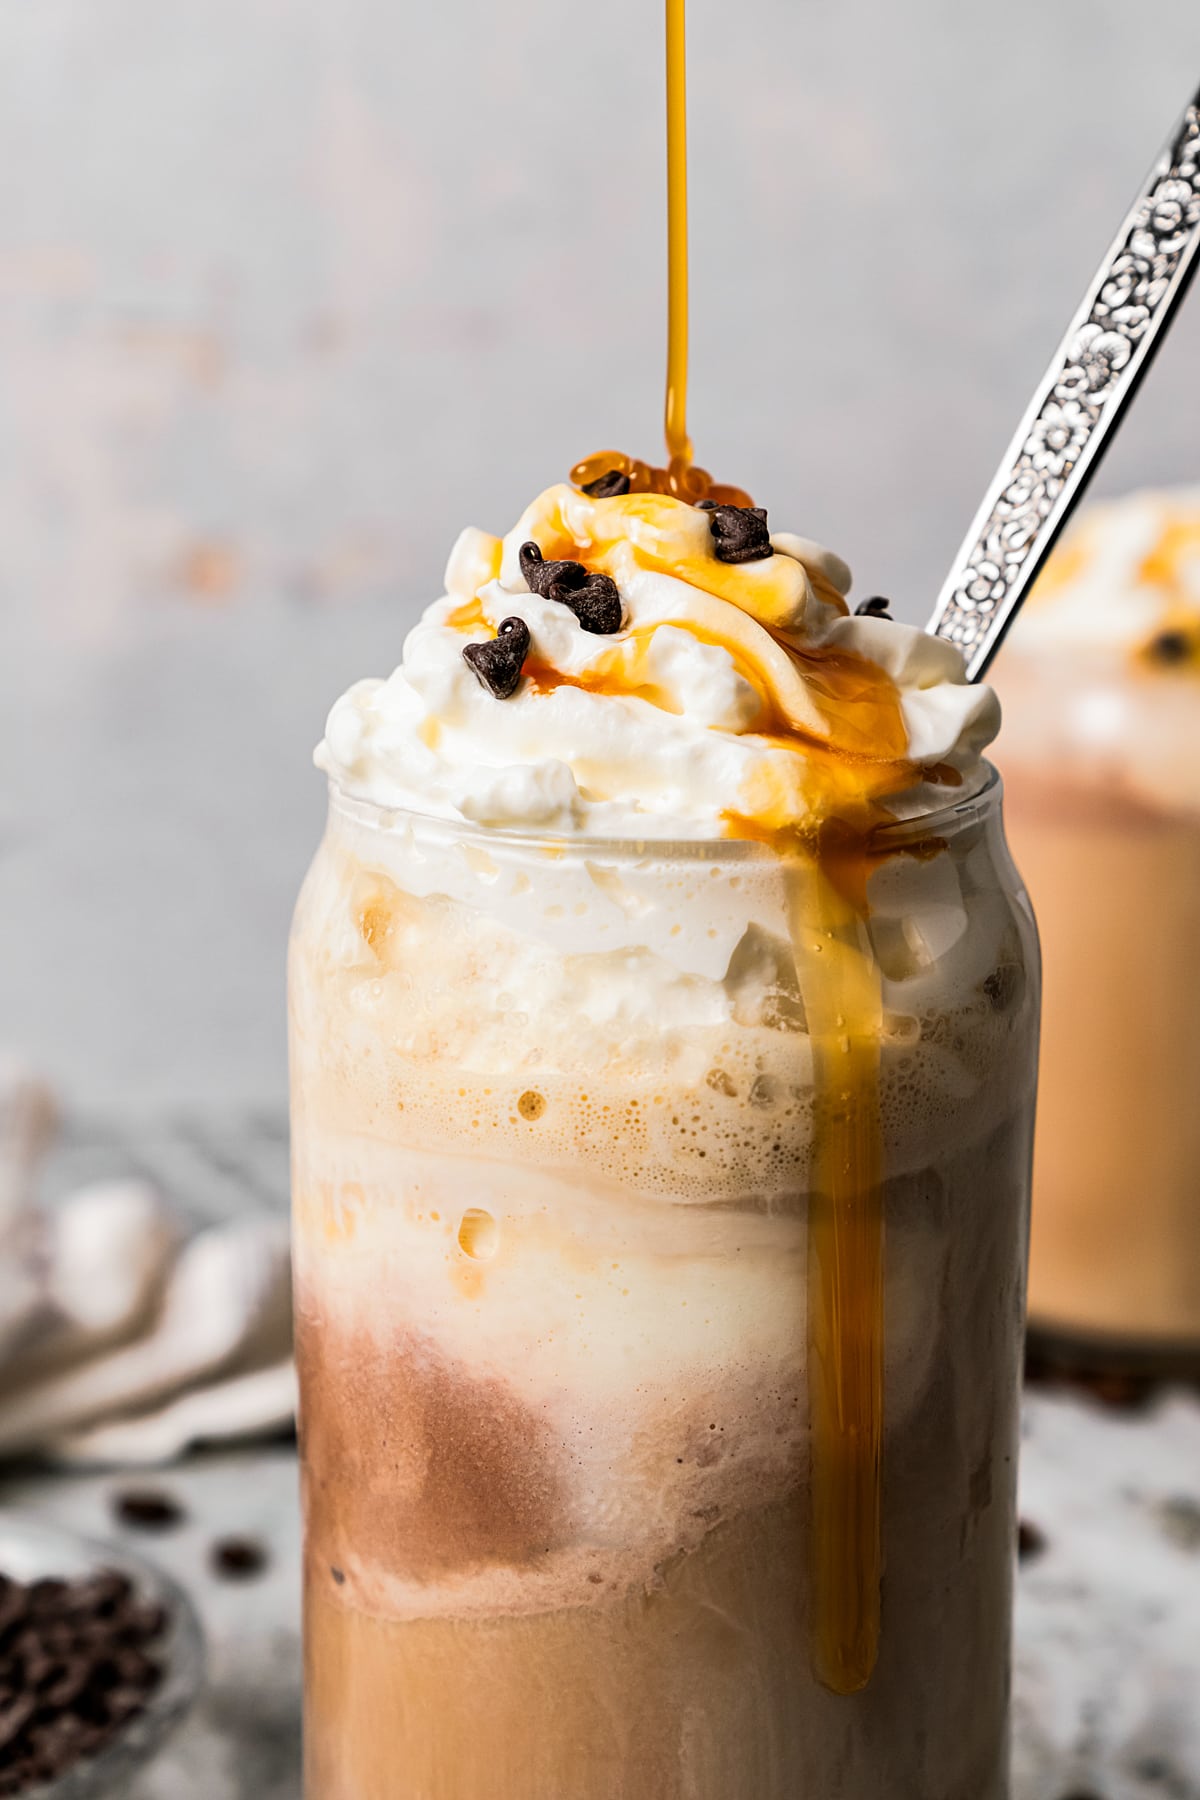 Close-up image of an ice coffee in a glass mug and topped with whipped cream, chocolate chips, and a caramel drizzle.